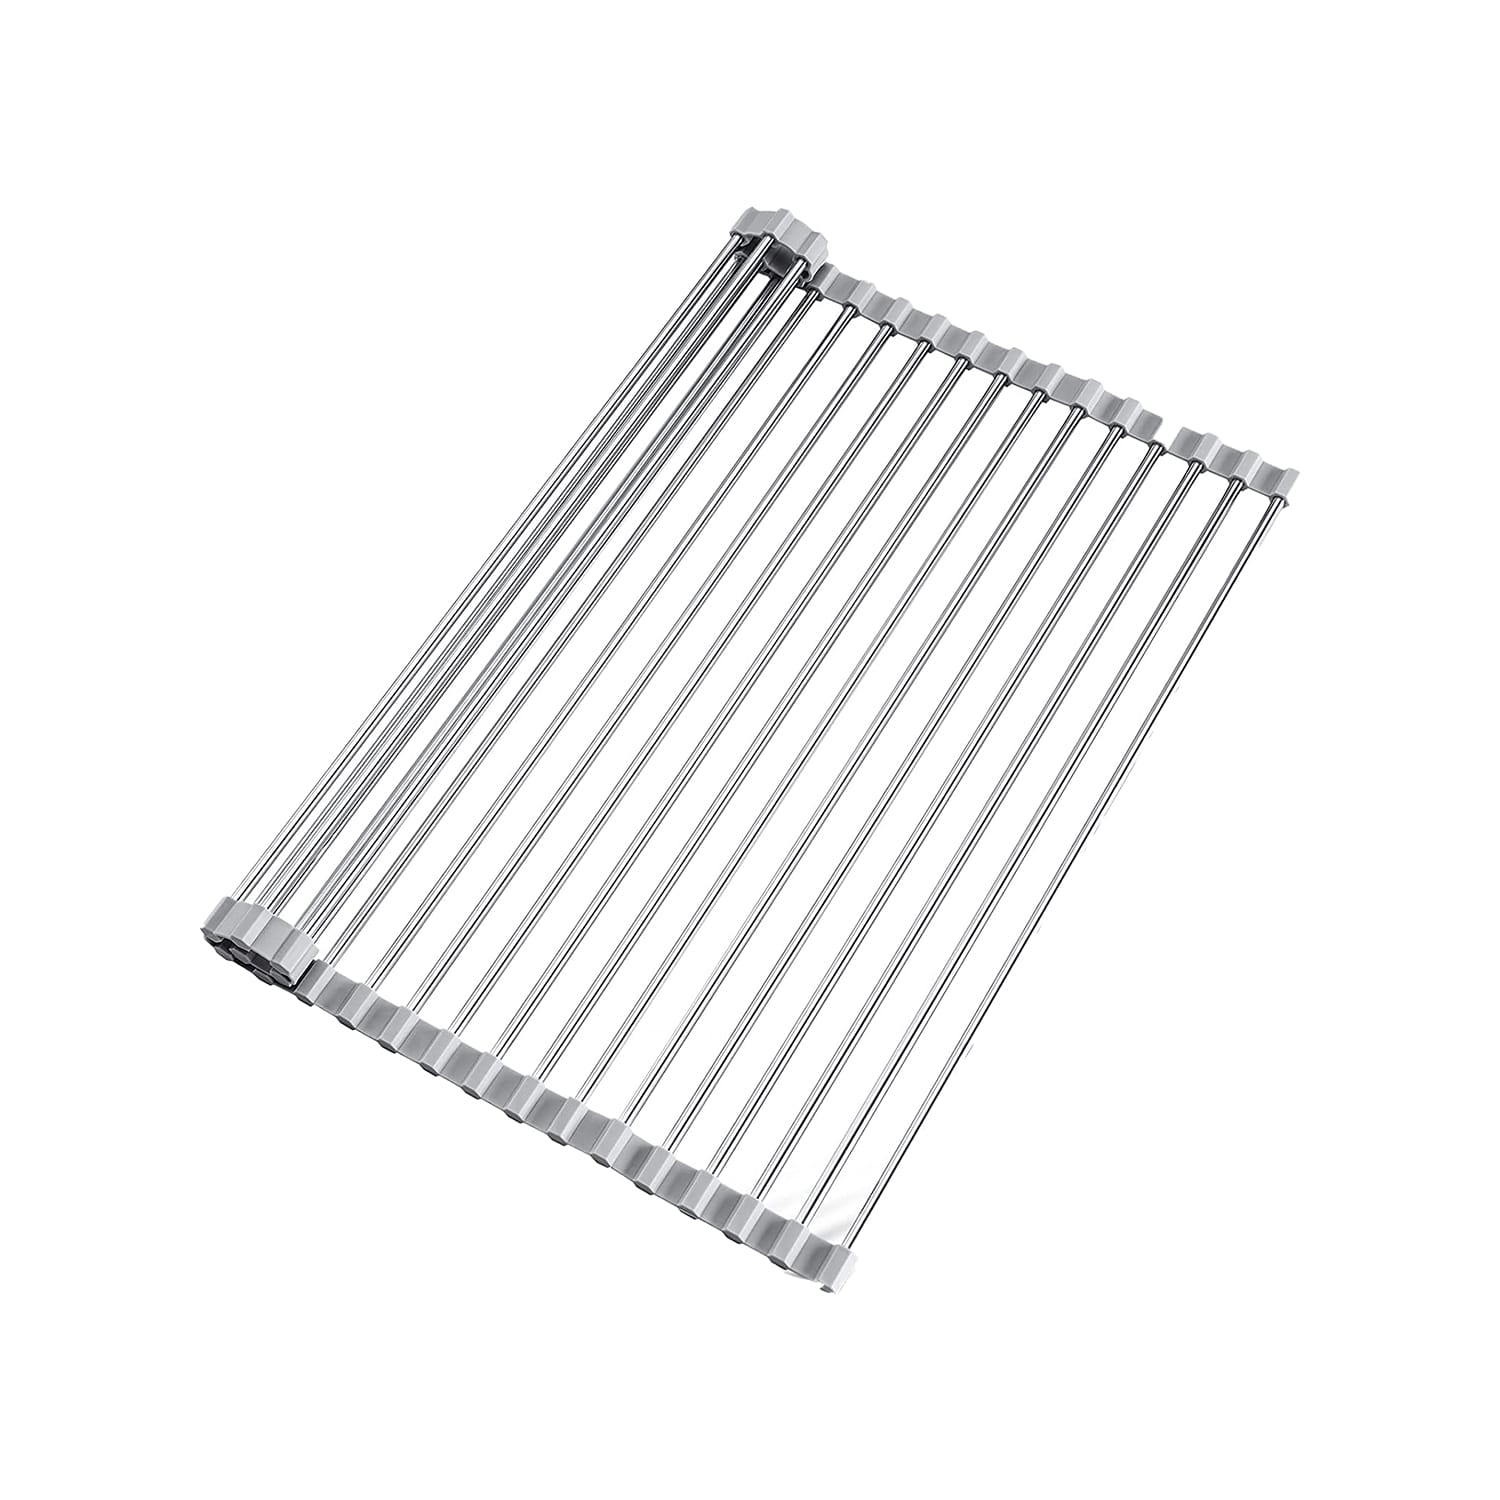 The Dish Drying Rack Going Viral on TikTok 2023 Is on Sale